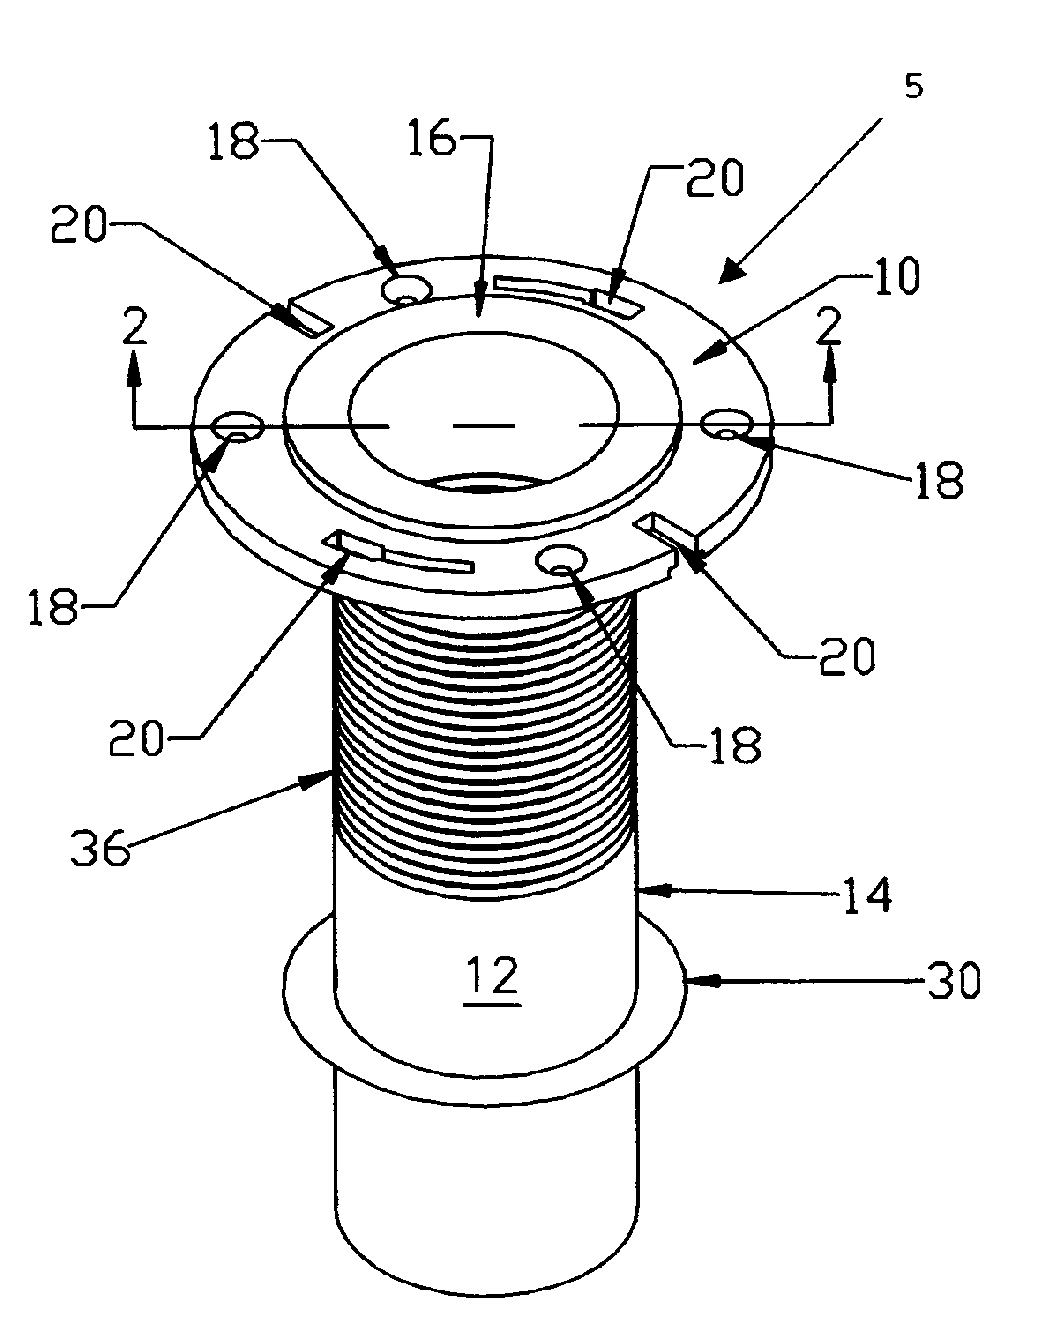 Flexible Sleeve for Connection to a Plumbing Fixture